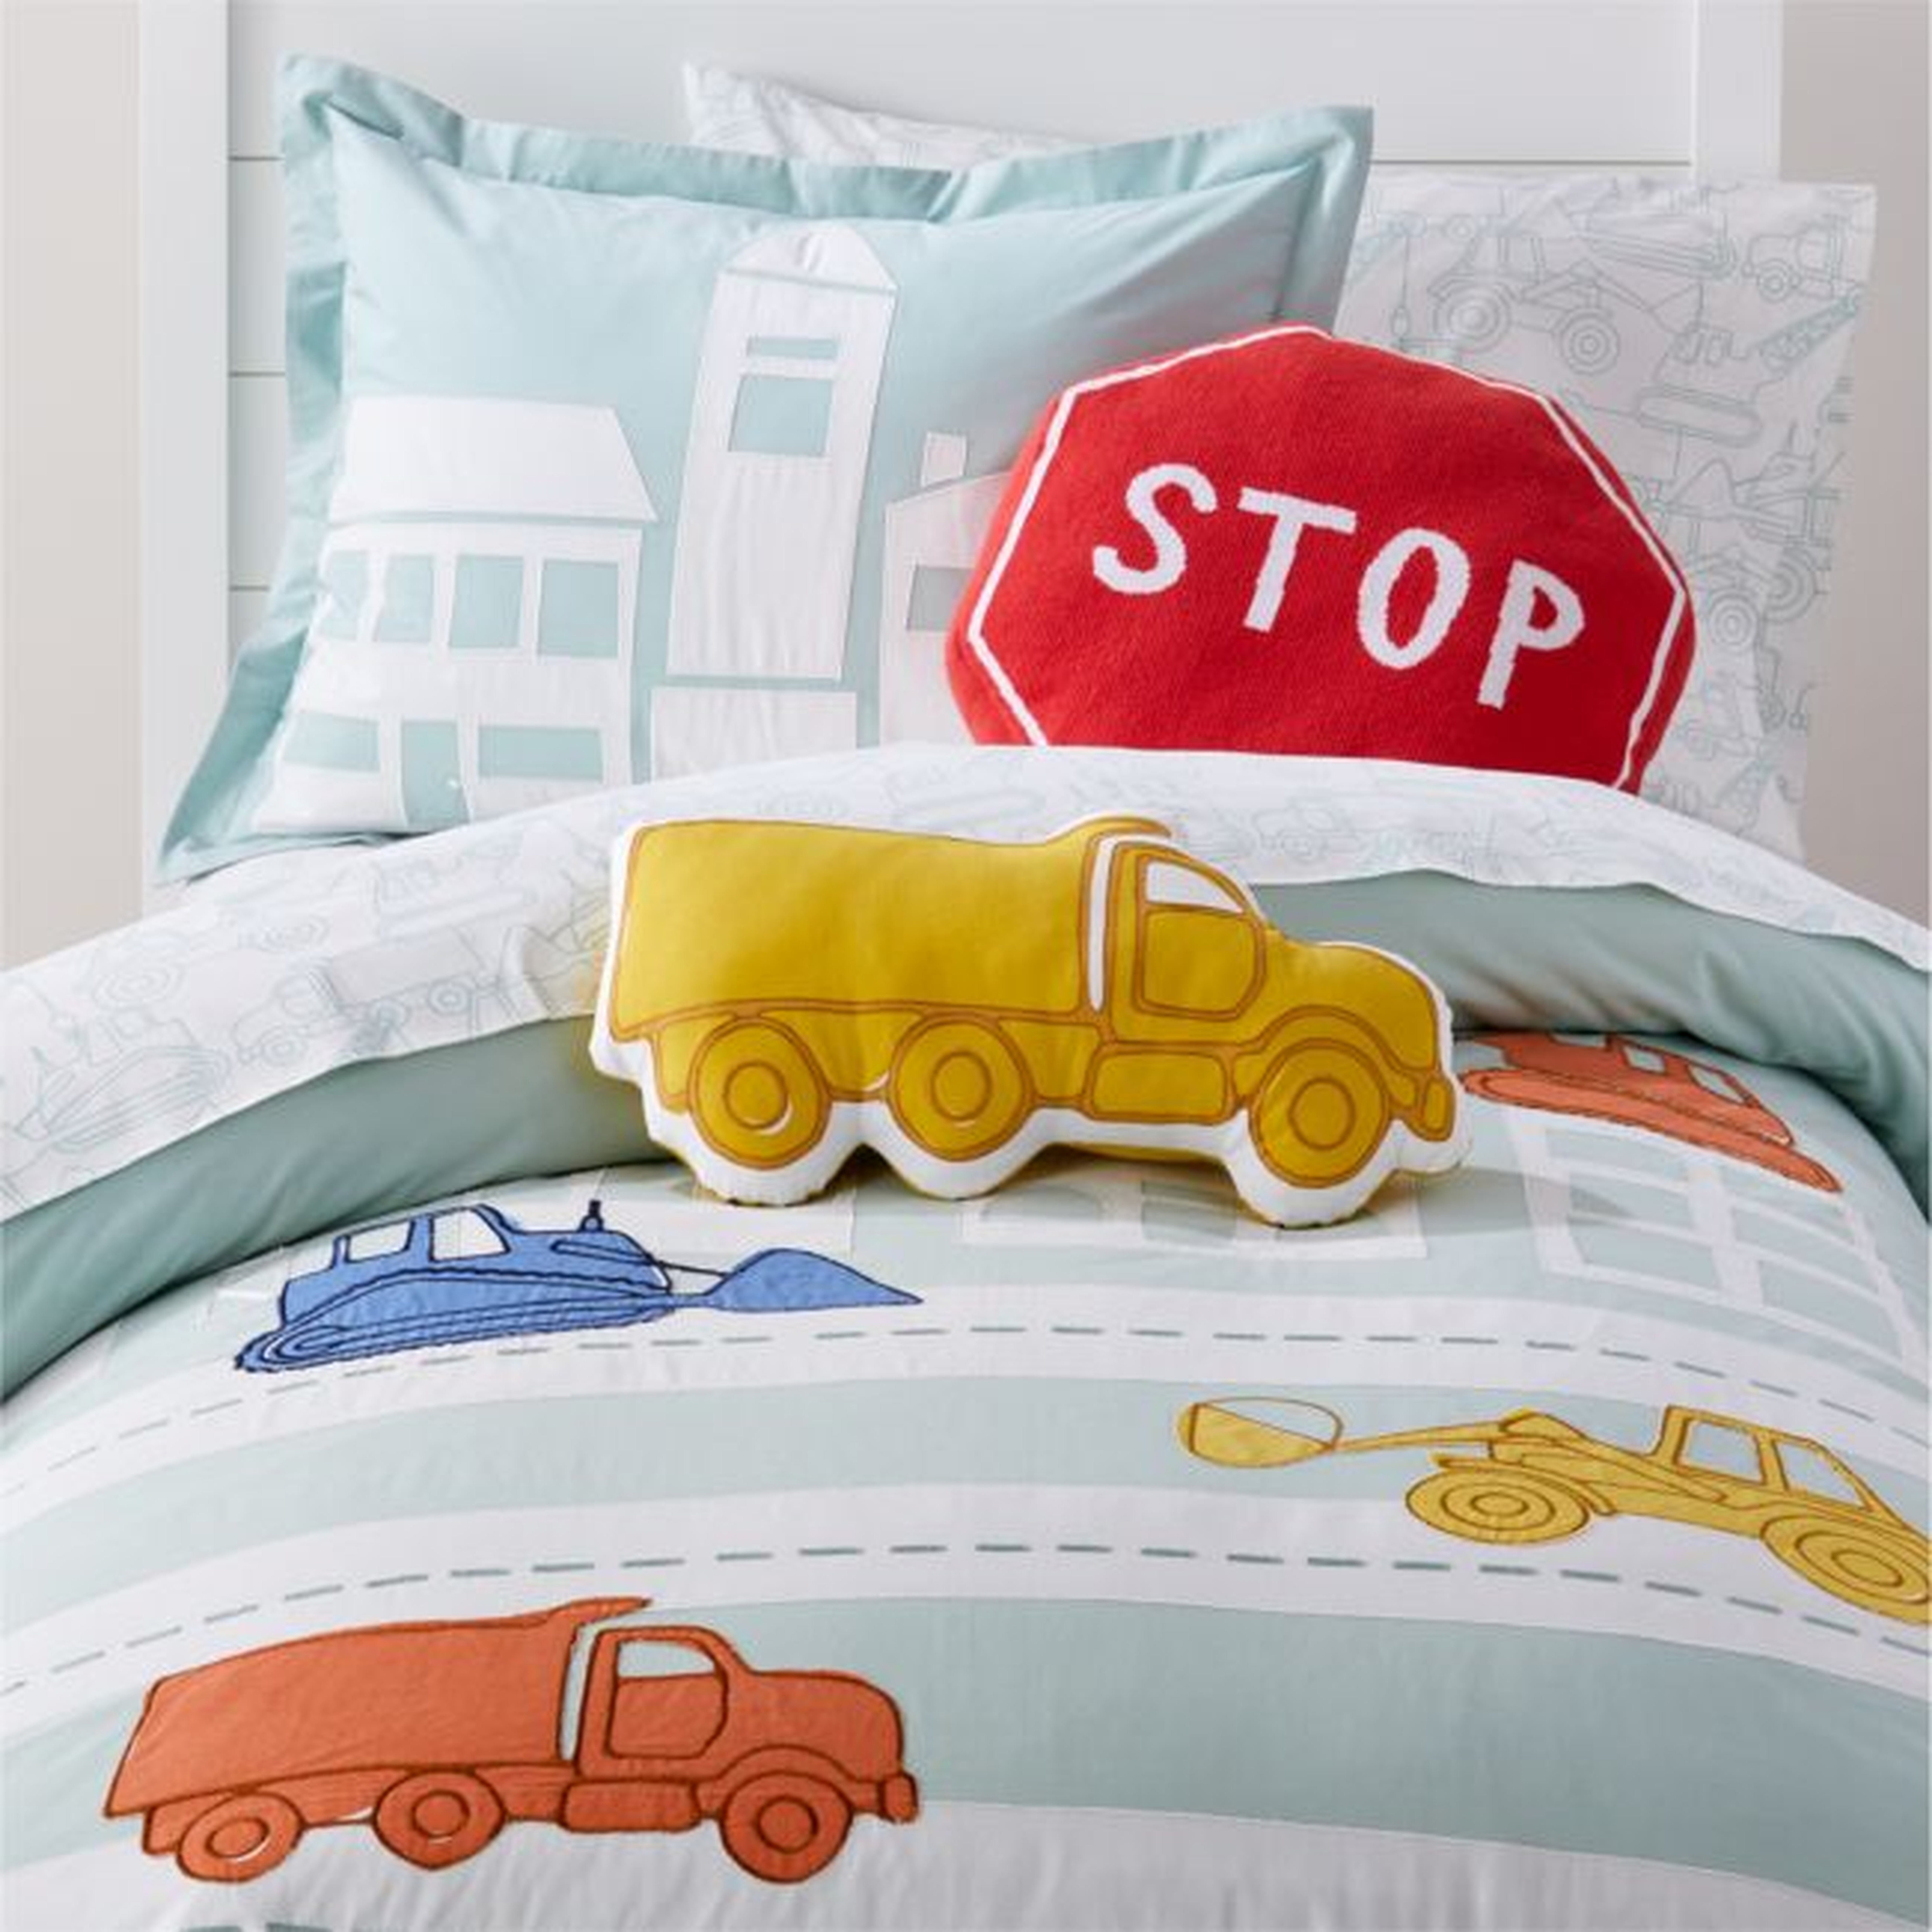 Construction Vehicle Twin Duvet Cover - Crate and Barrel